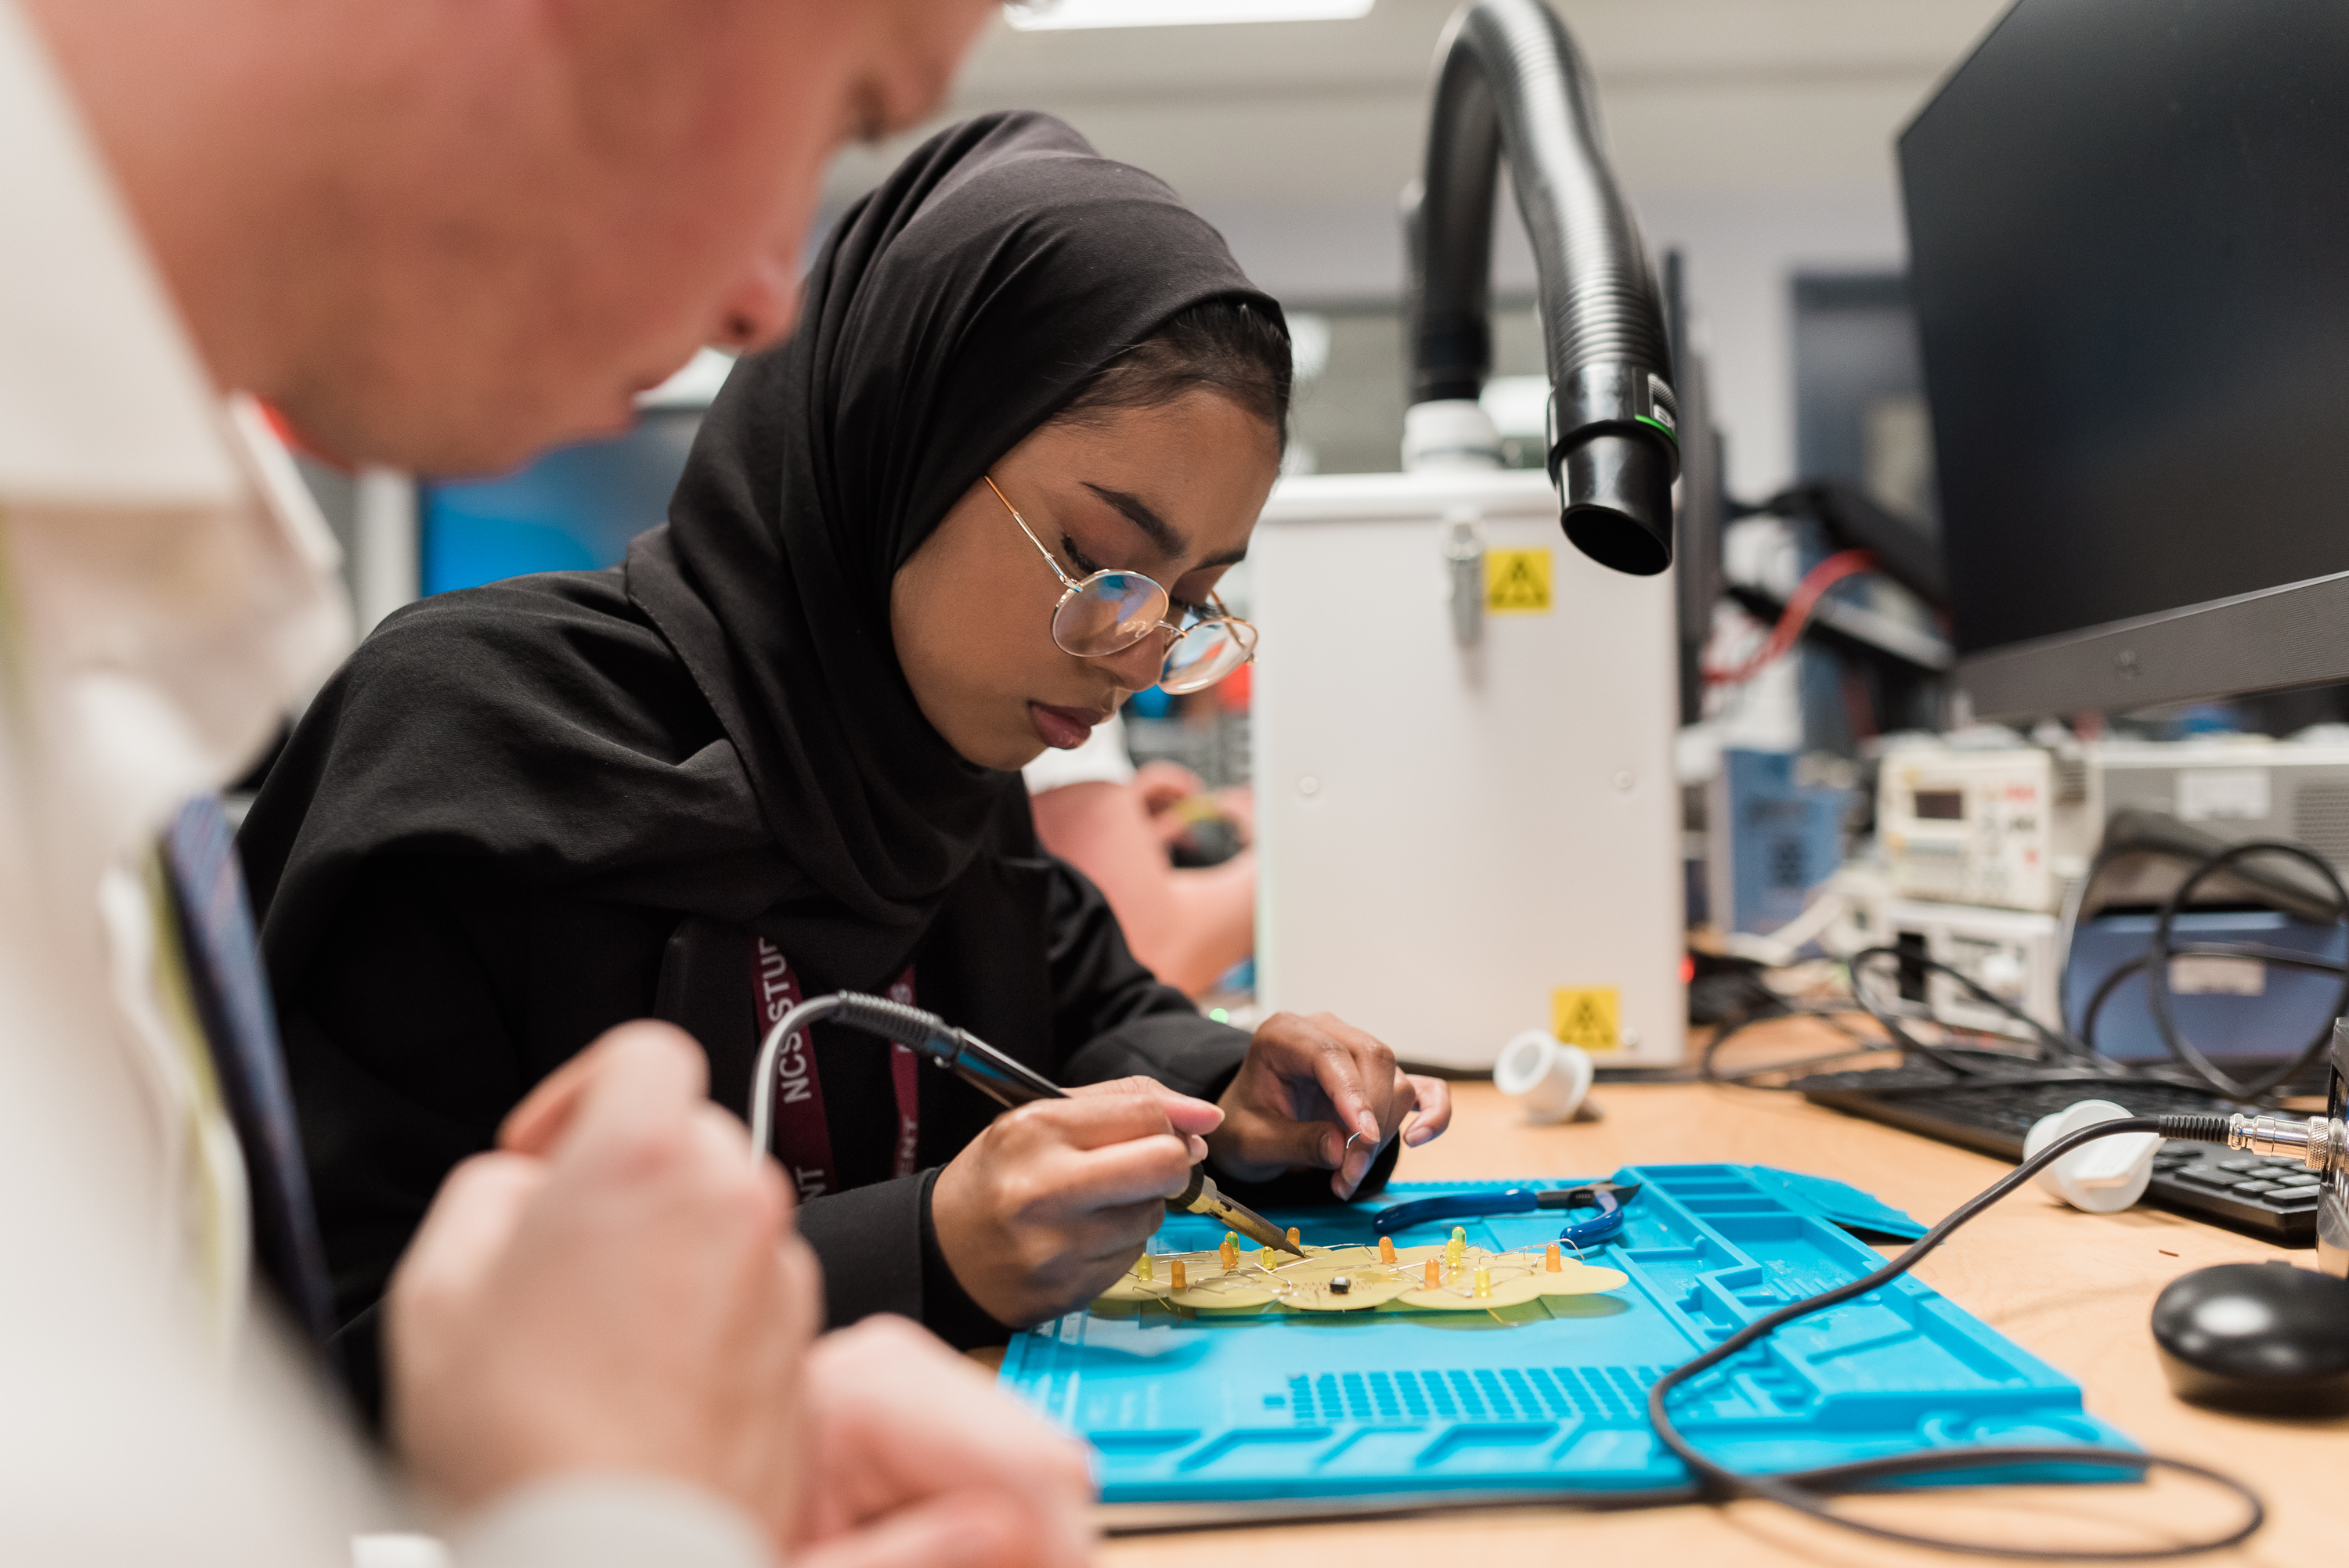 A young woman or girl wearing a hijab, using an engineering tool carefully over a task.